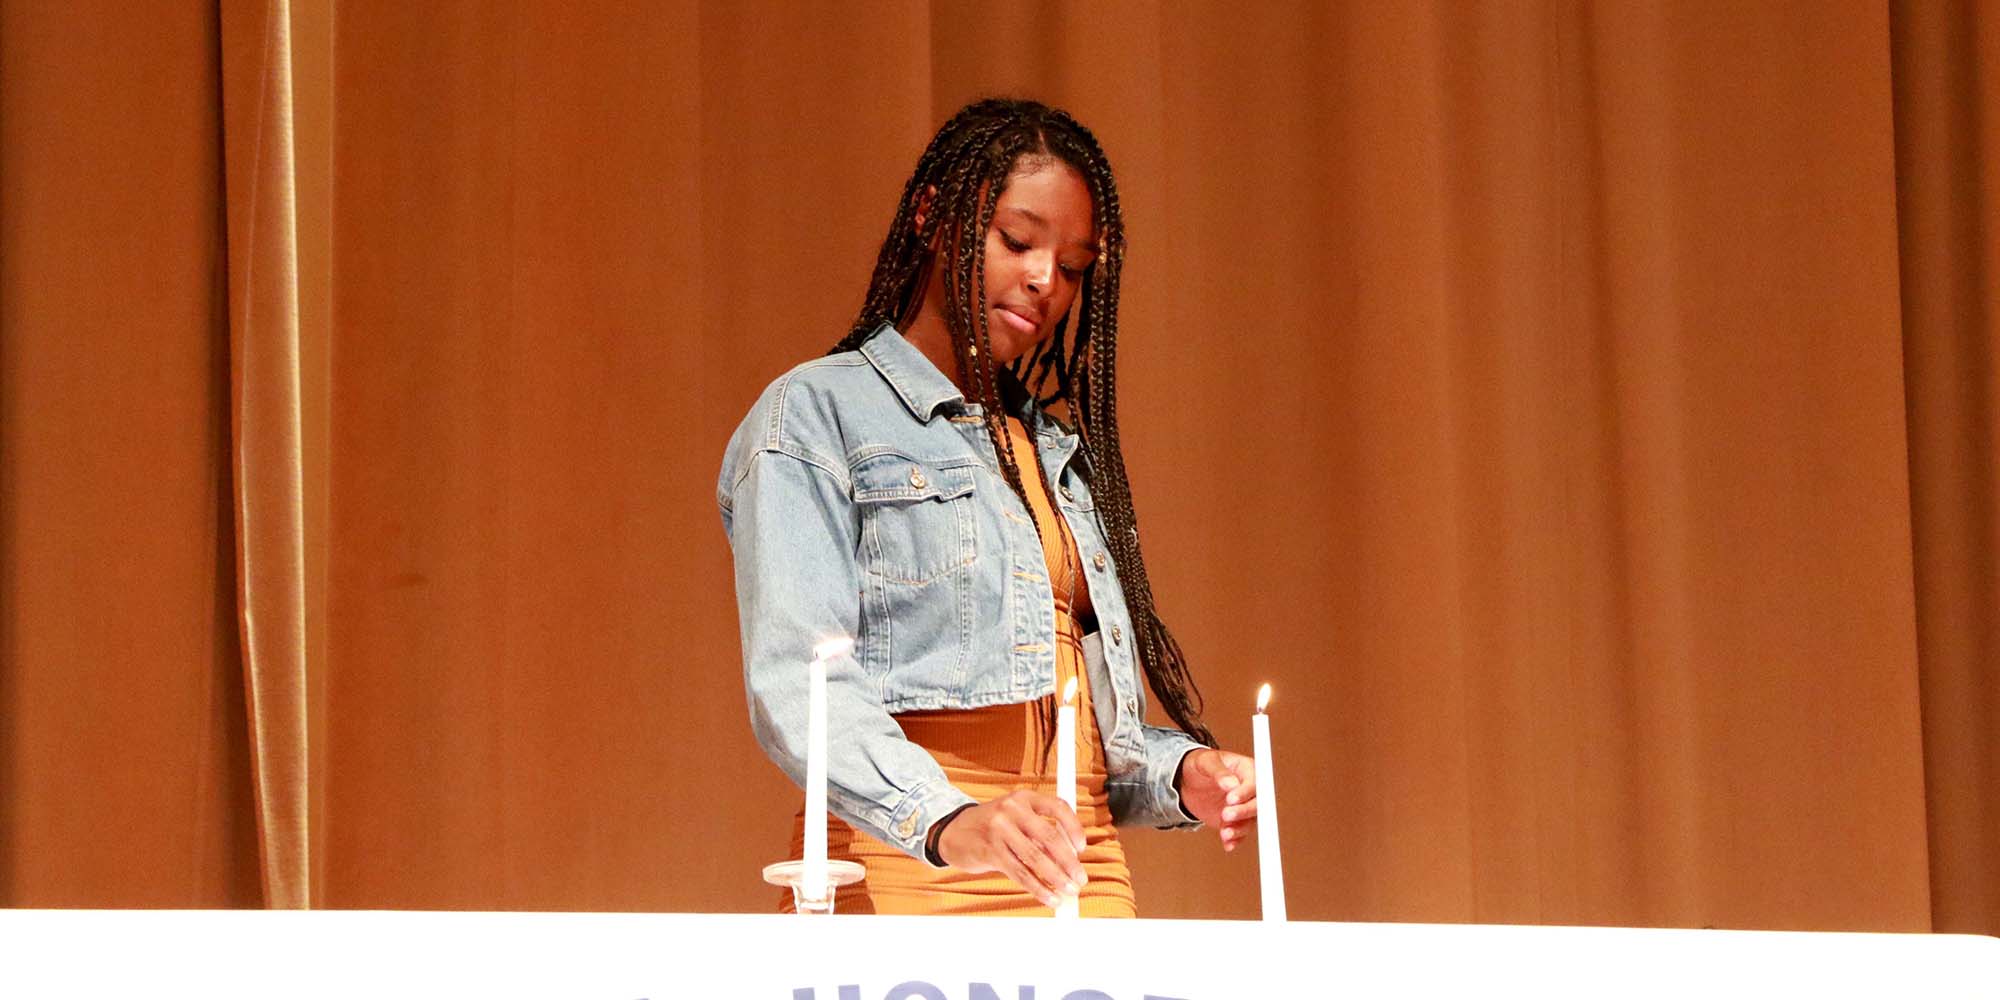 A girl lights candles on a National Honor Society table